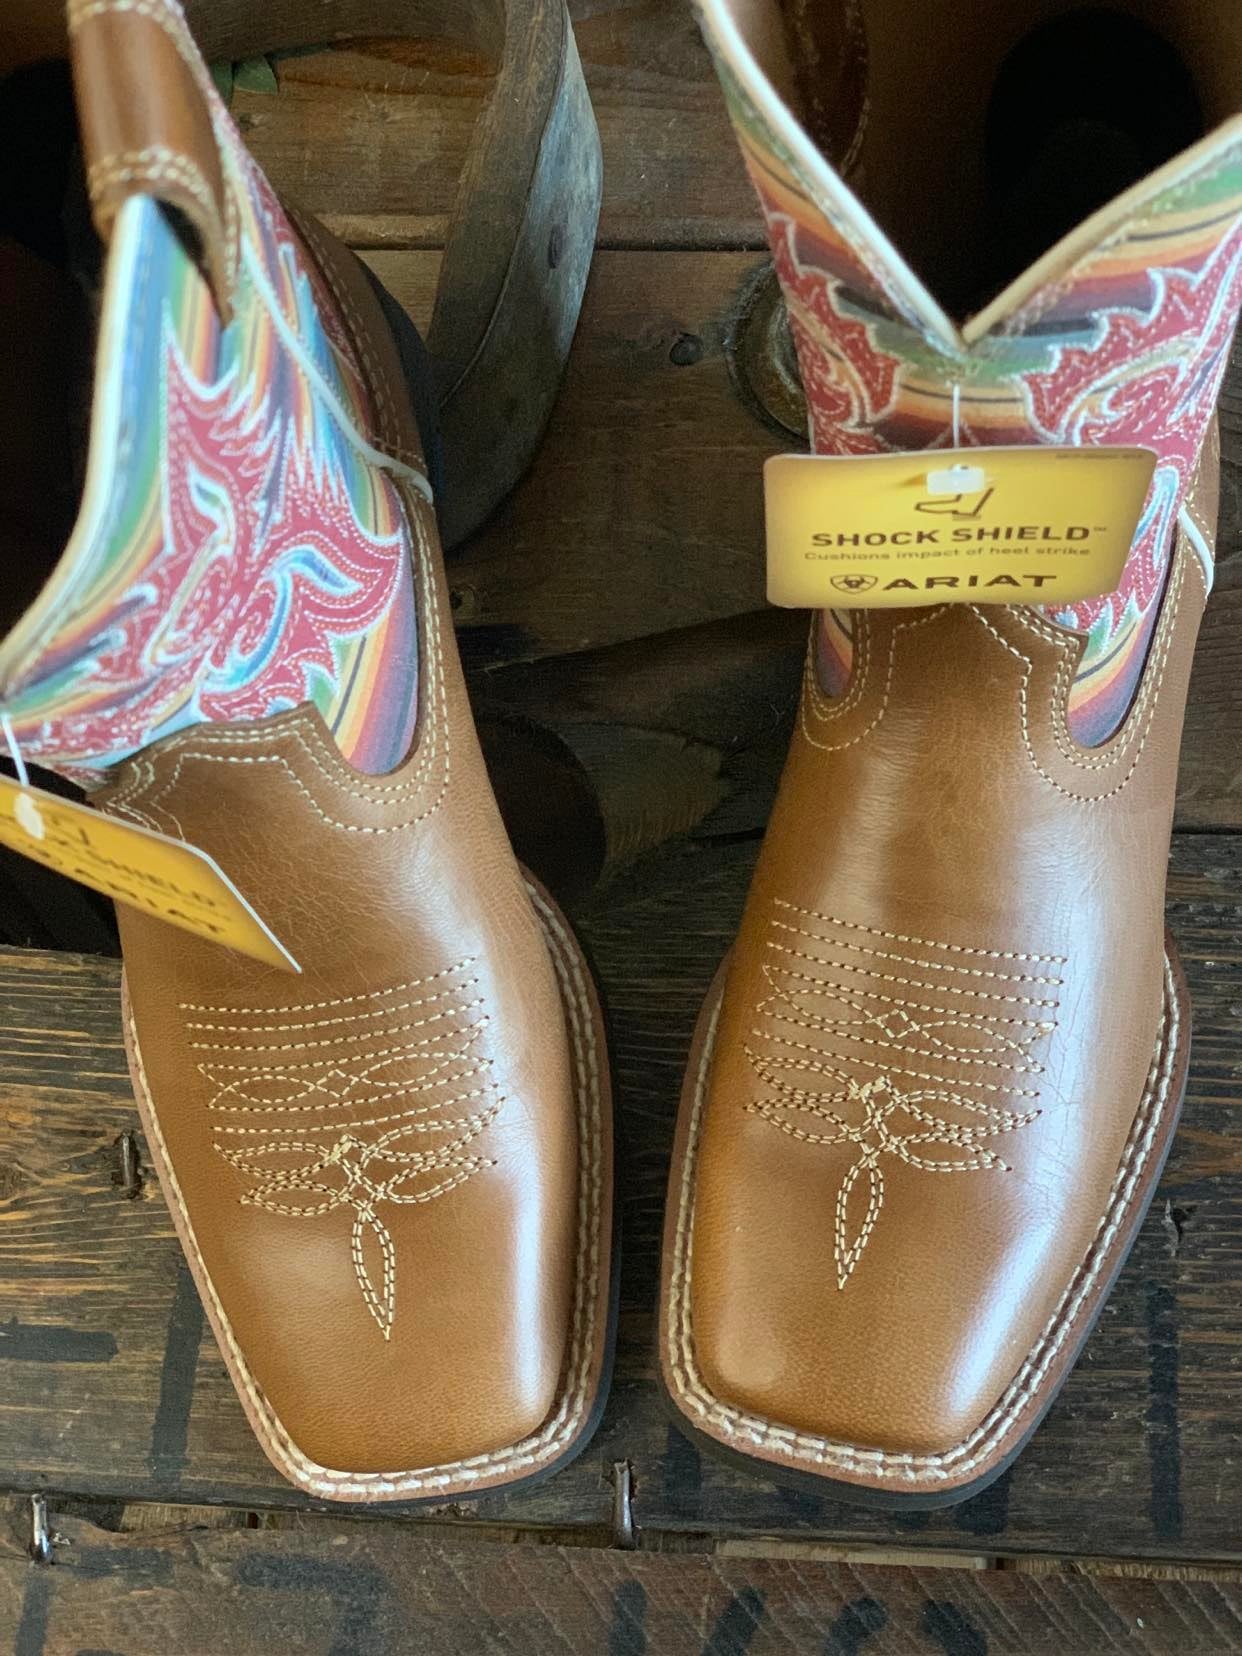 Ariat Youth Lonestar Ridge Tan and Serape Shock Shield Square Toe Cowboy Boots-Kids Boots-Ariat-Lucky J Boots & More, Women's, Men's, & Kids Western Store Located in Carthage, MO